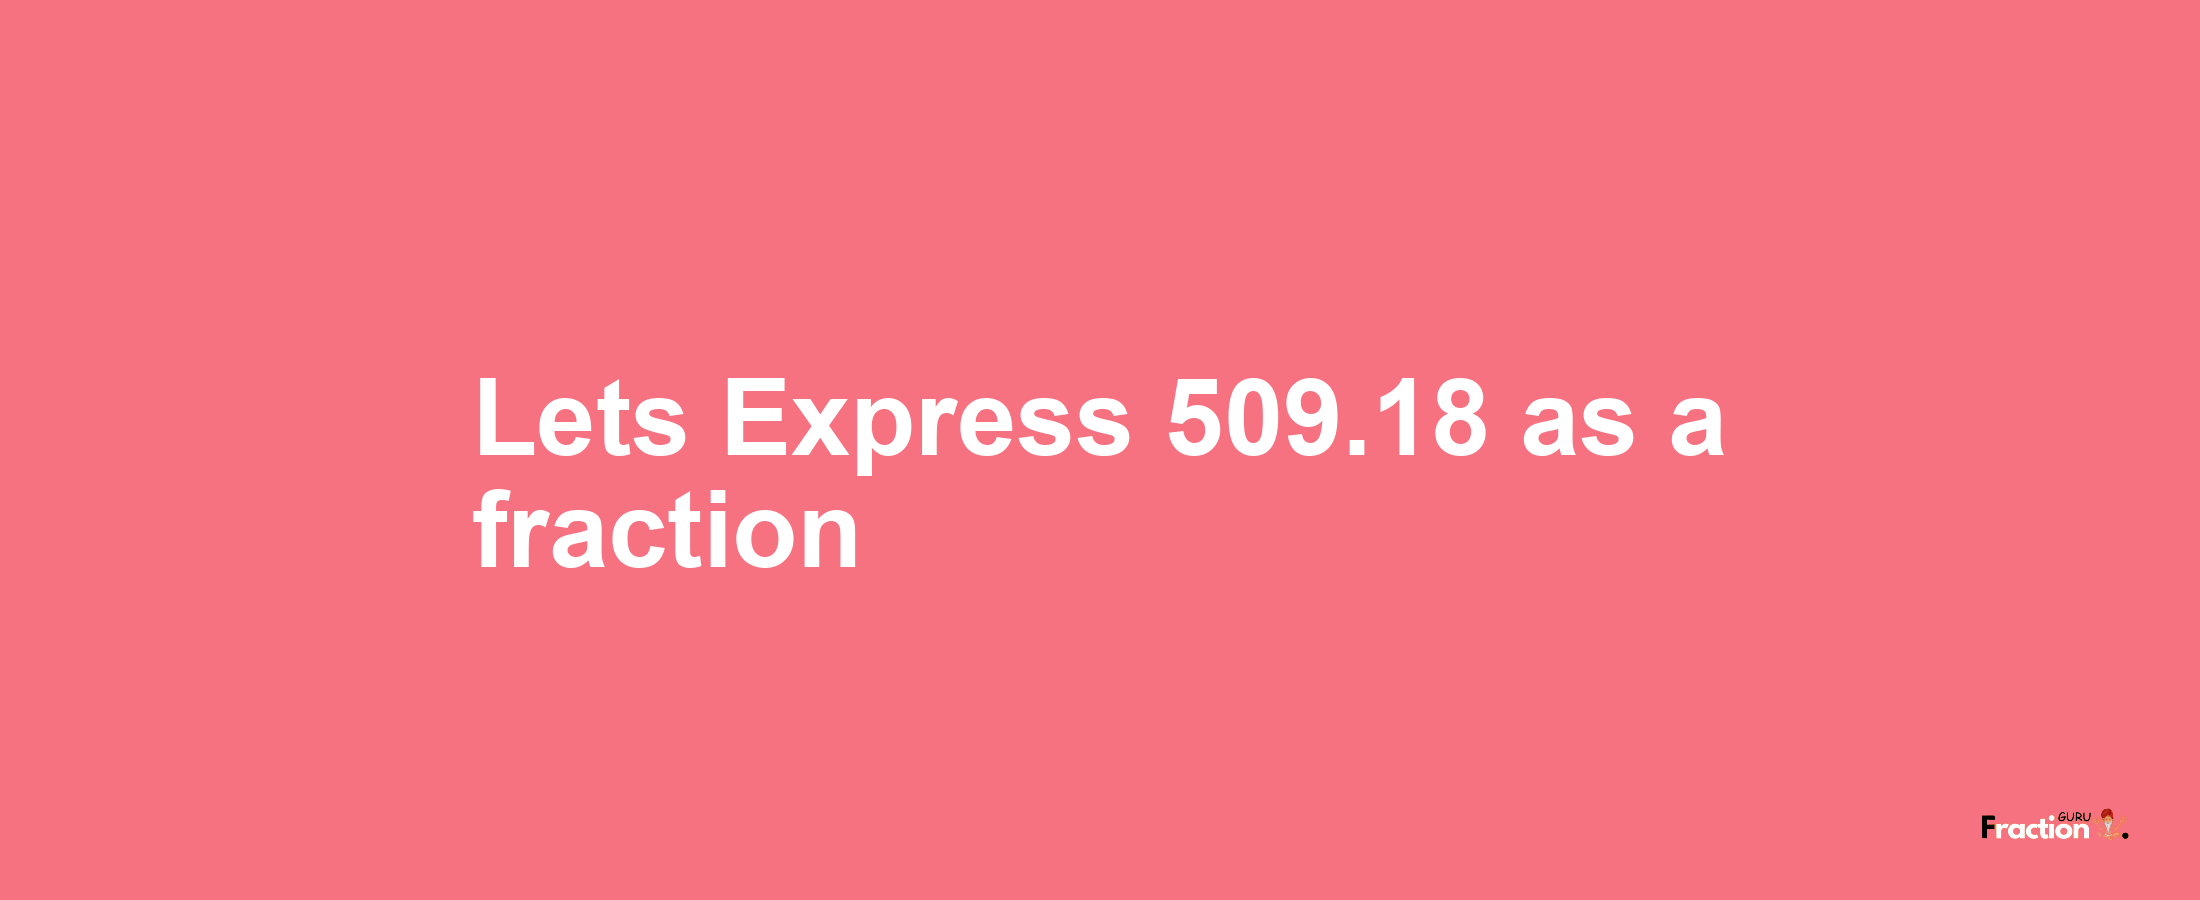 Lets Express 509.18 as afraction